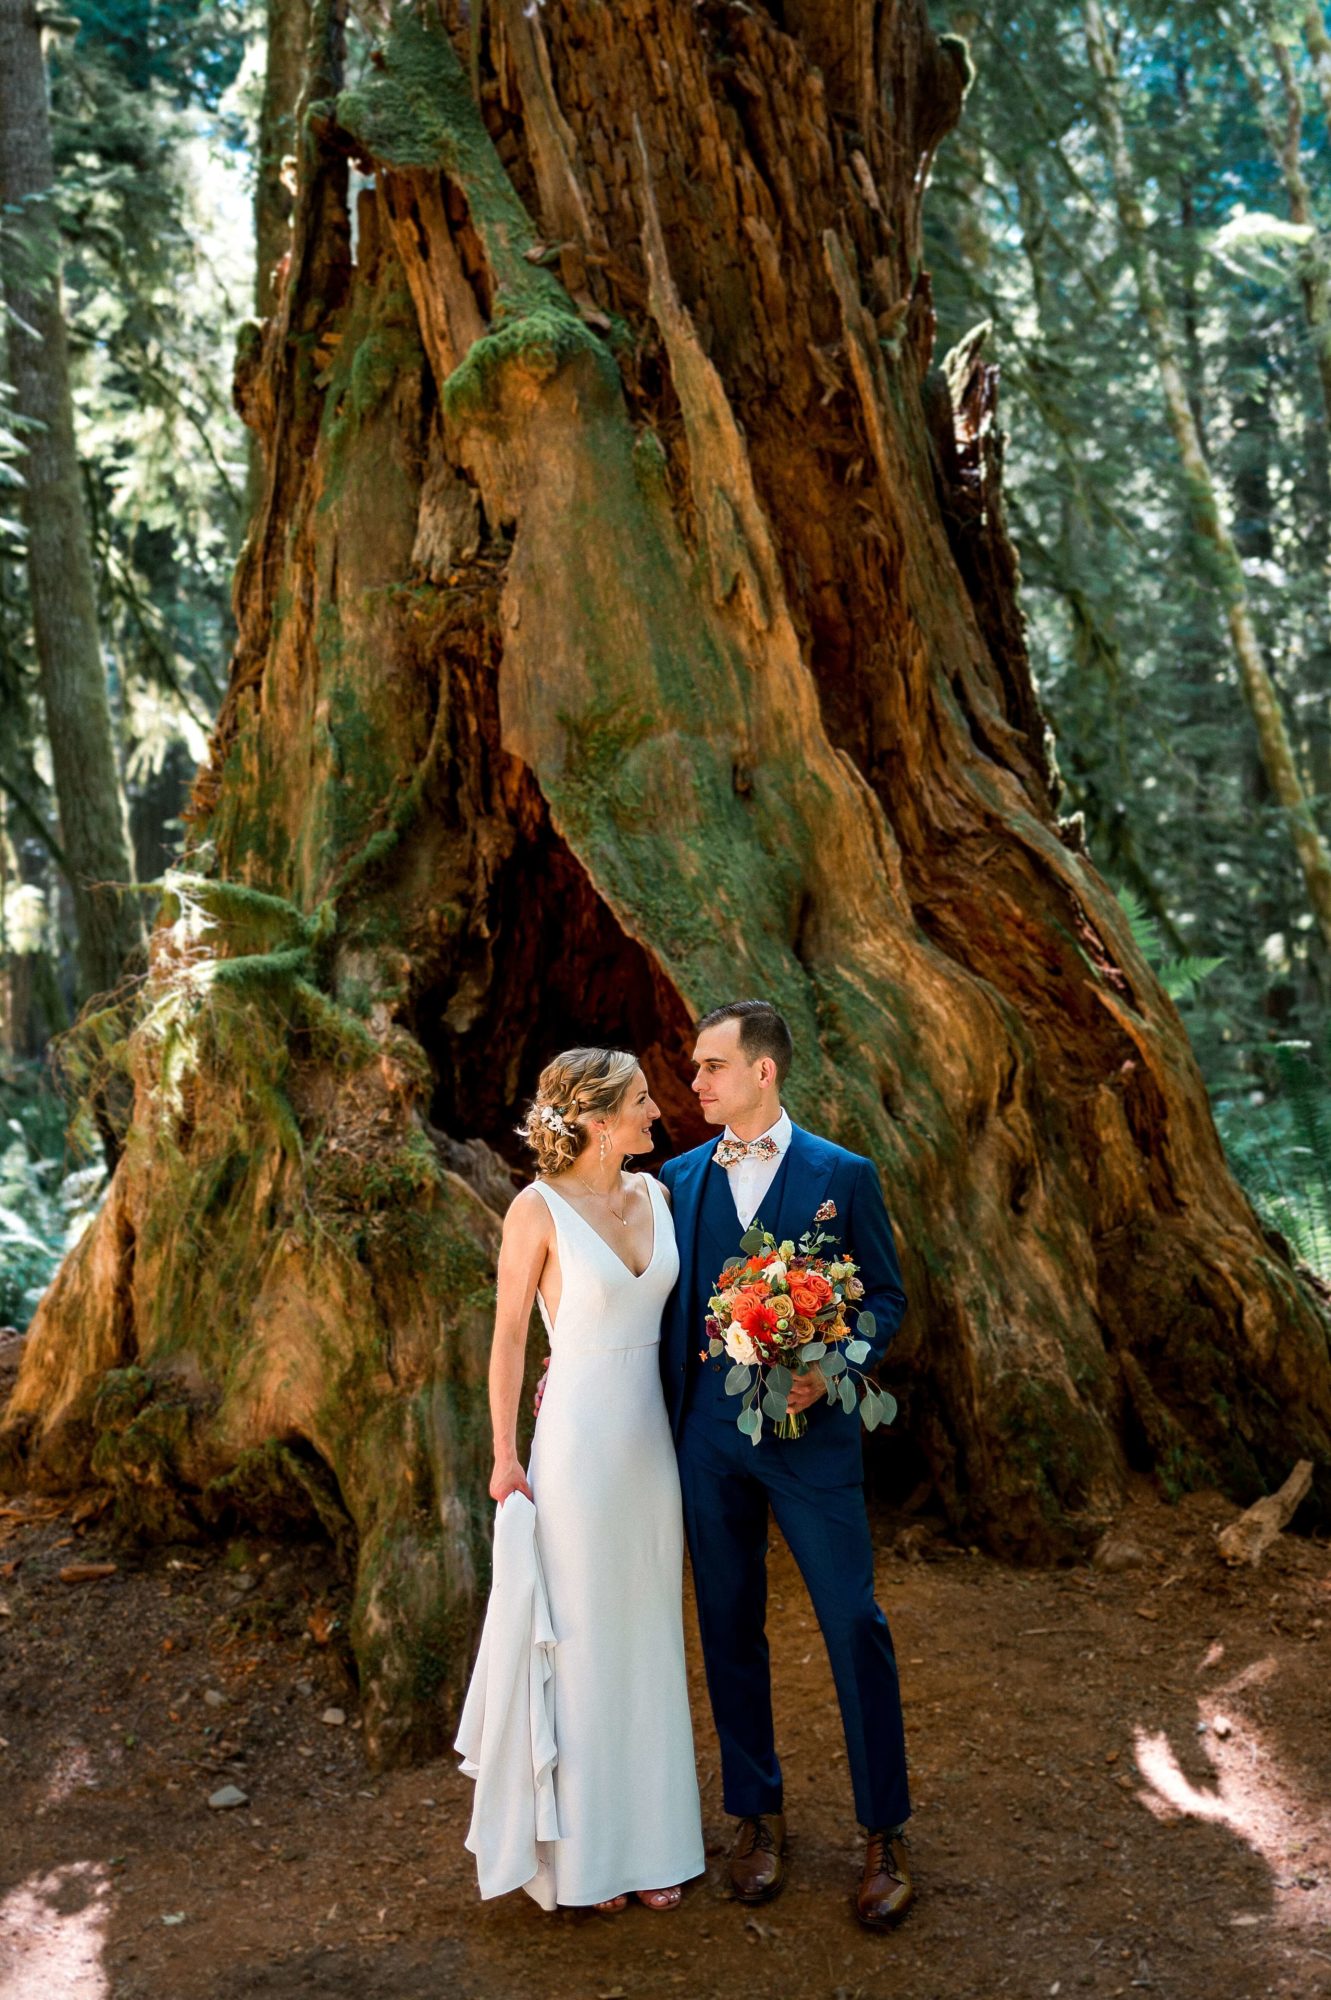 bride with Groom holding bridal bouquet in front of ancient tree